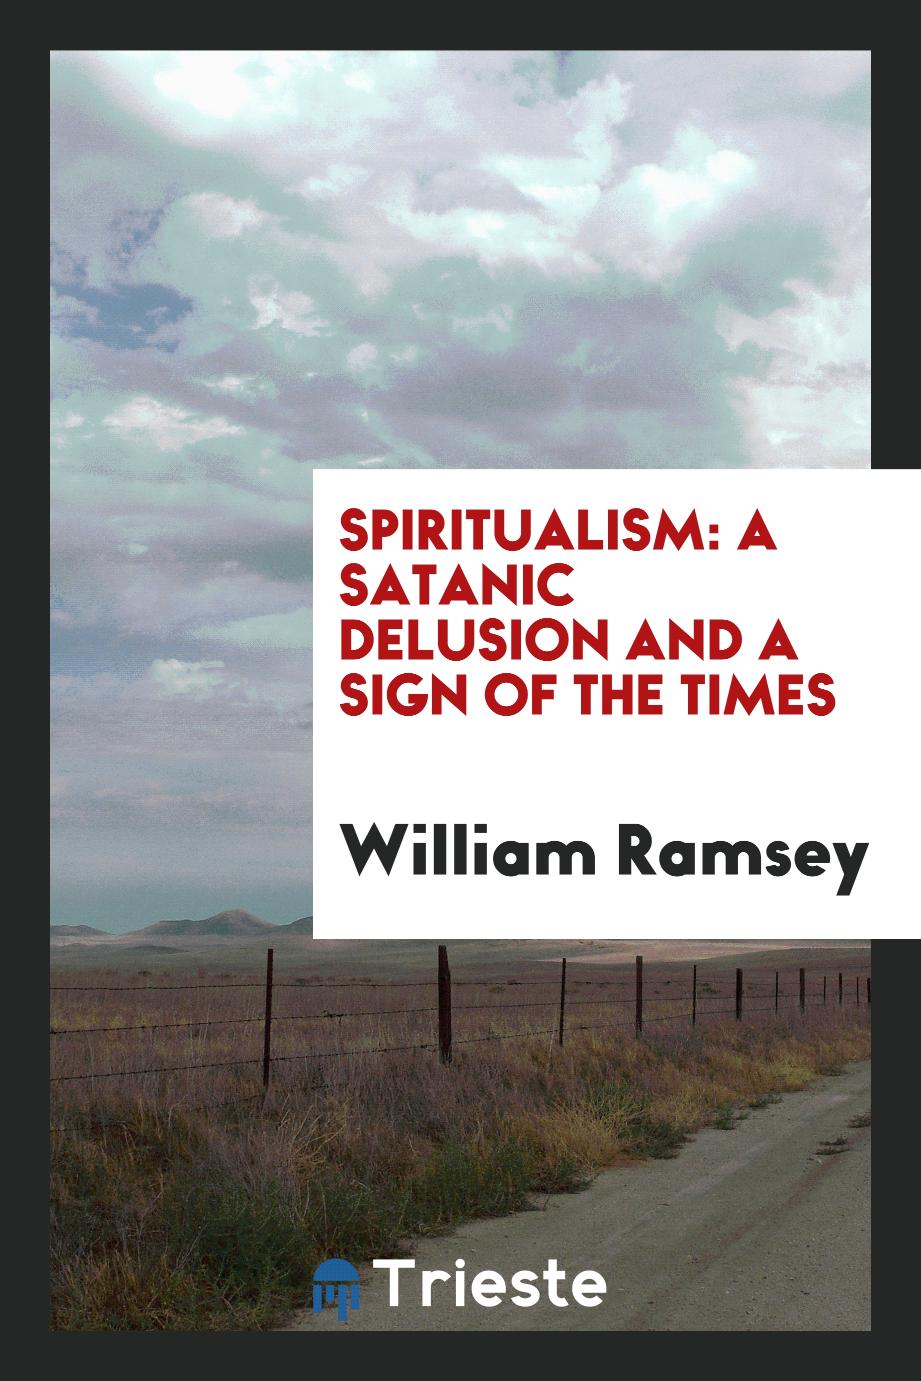 Spiritualism: A Satanic Delusion and a Sign of the Times